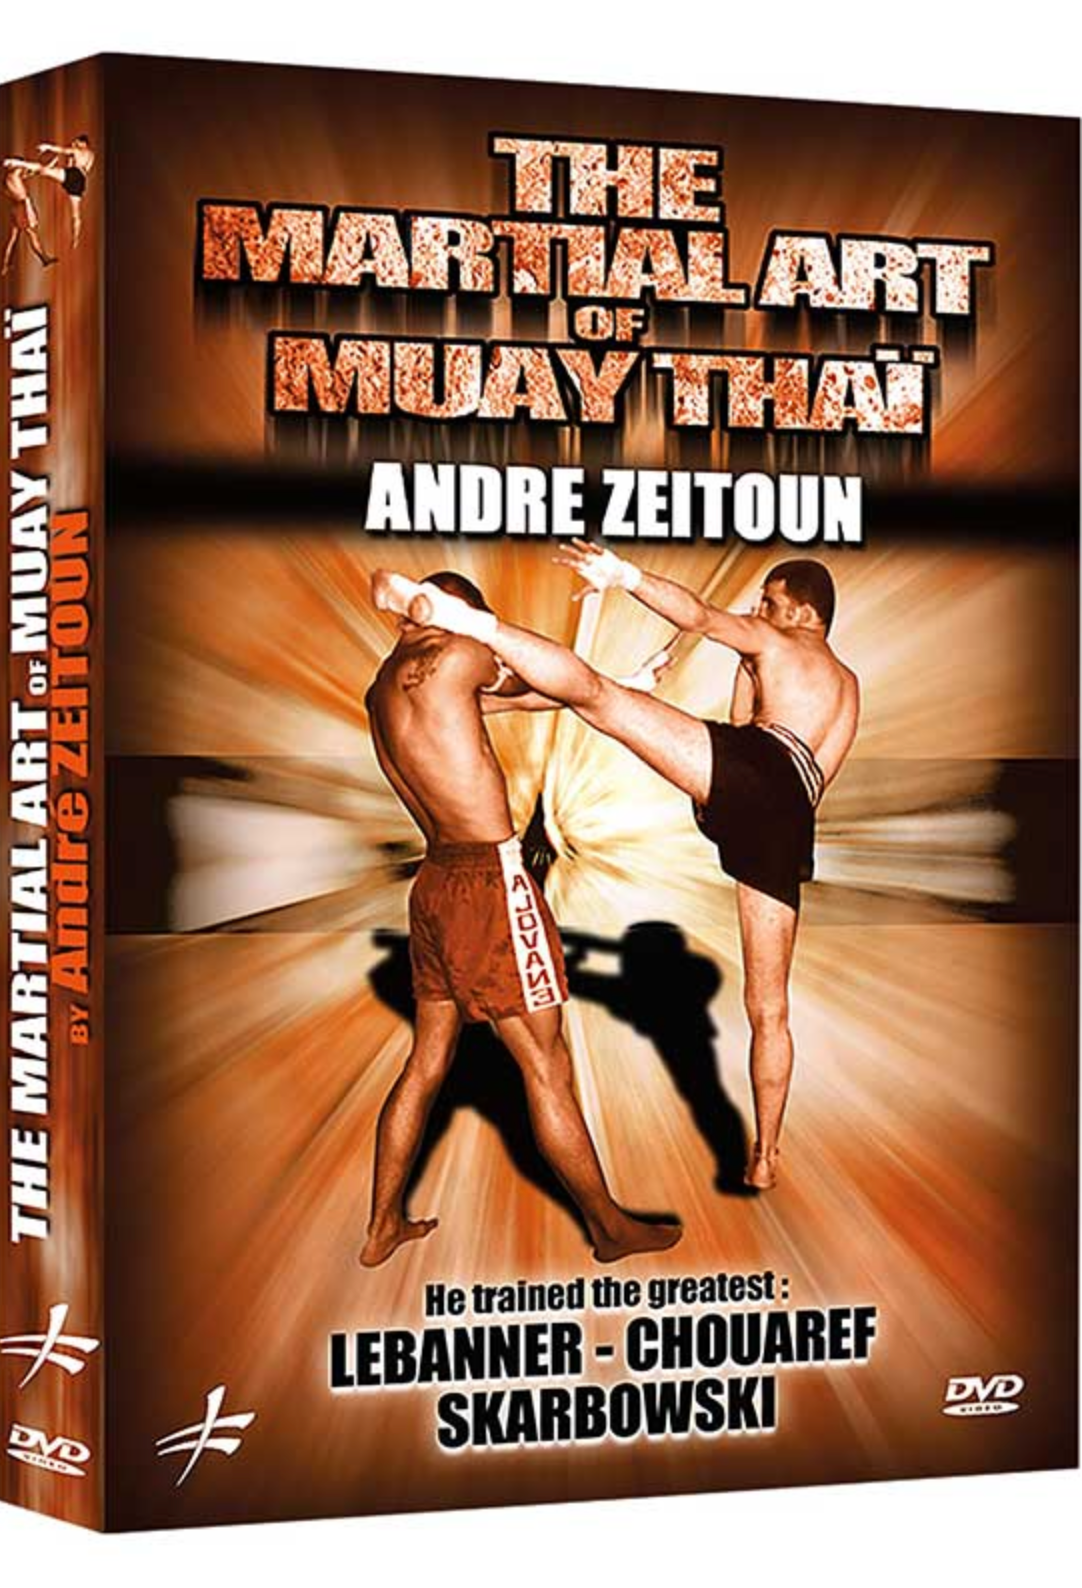 The Martial Art of Muay Thai DVD by Andre Zeitoun